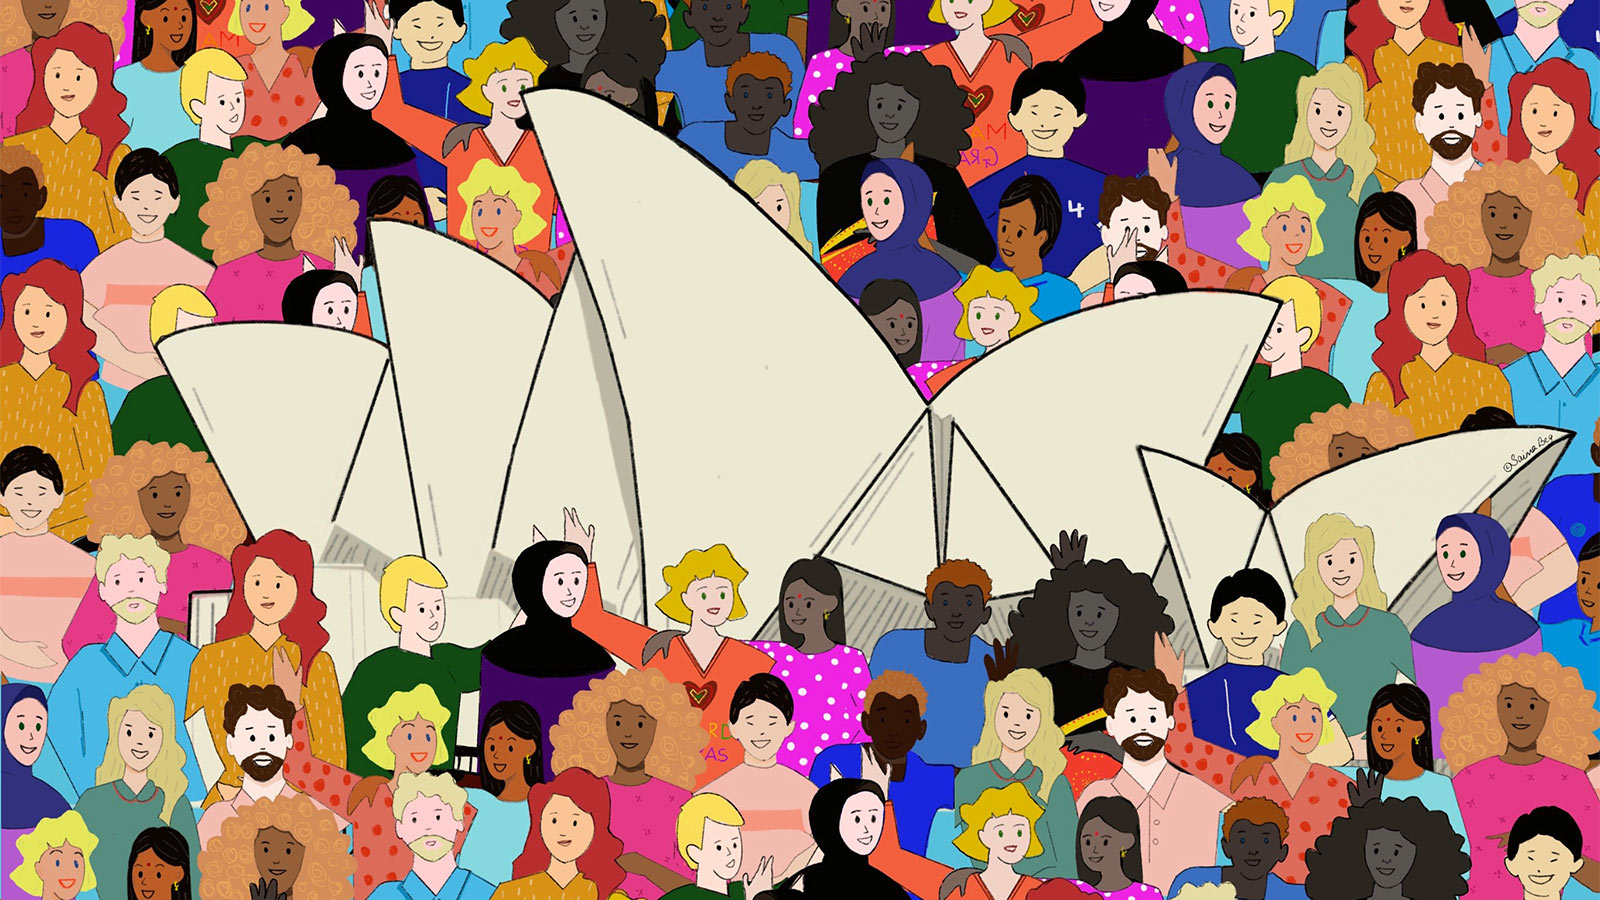 An animation of Sydney opera house with diverse people around it.